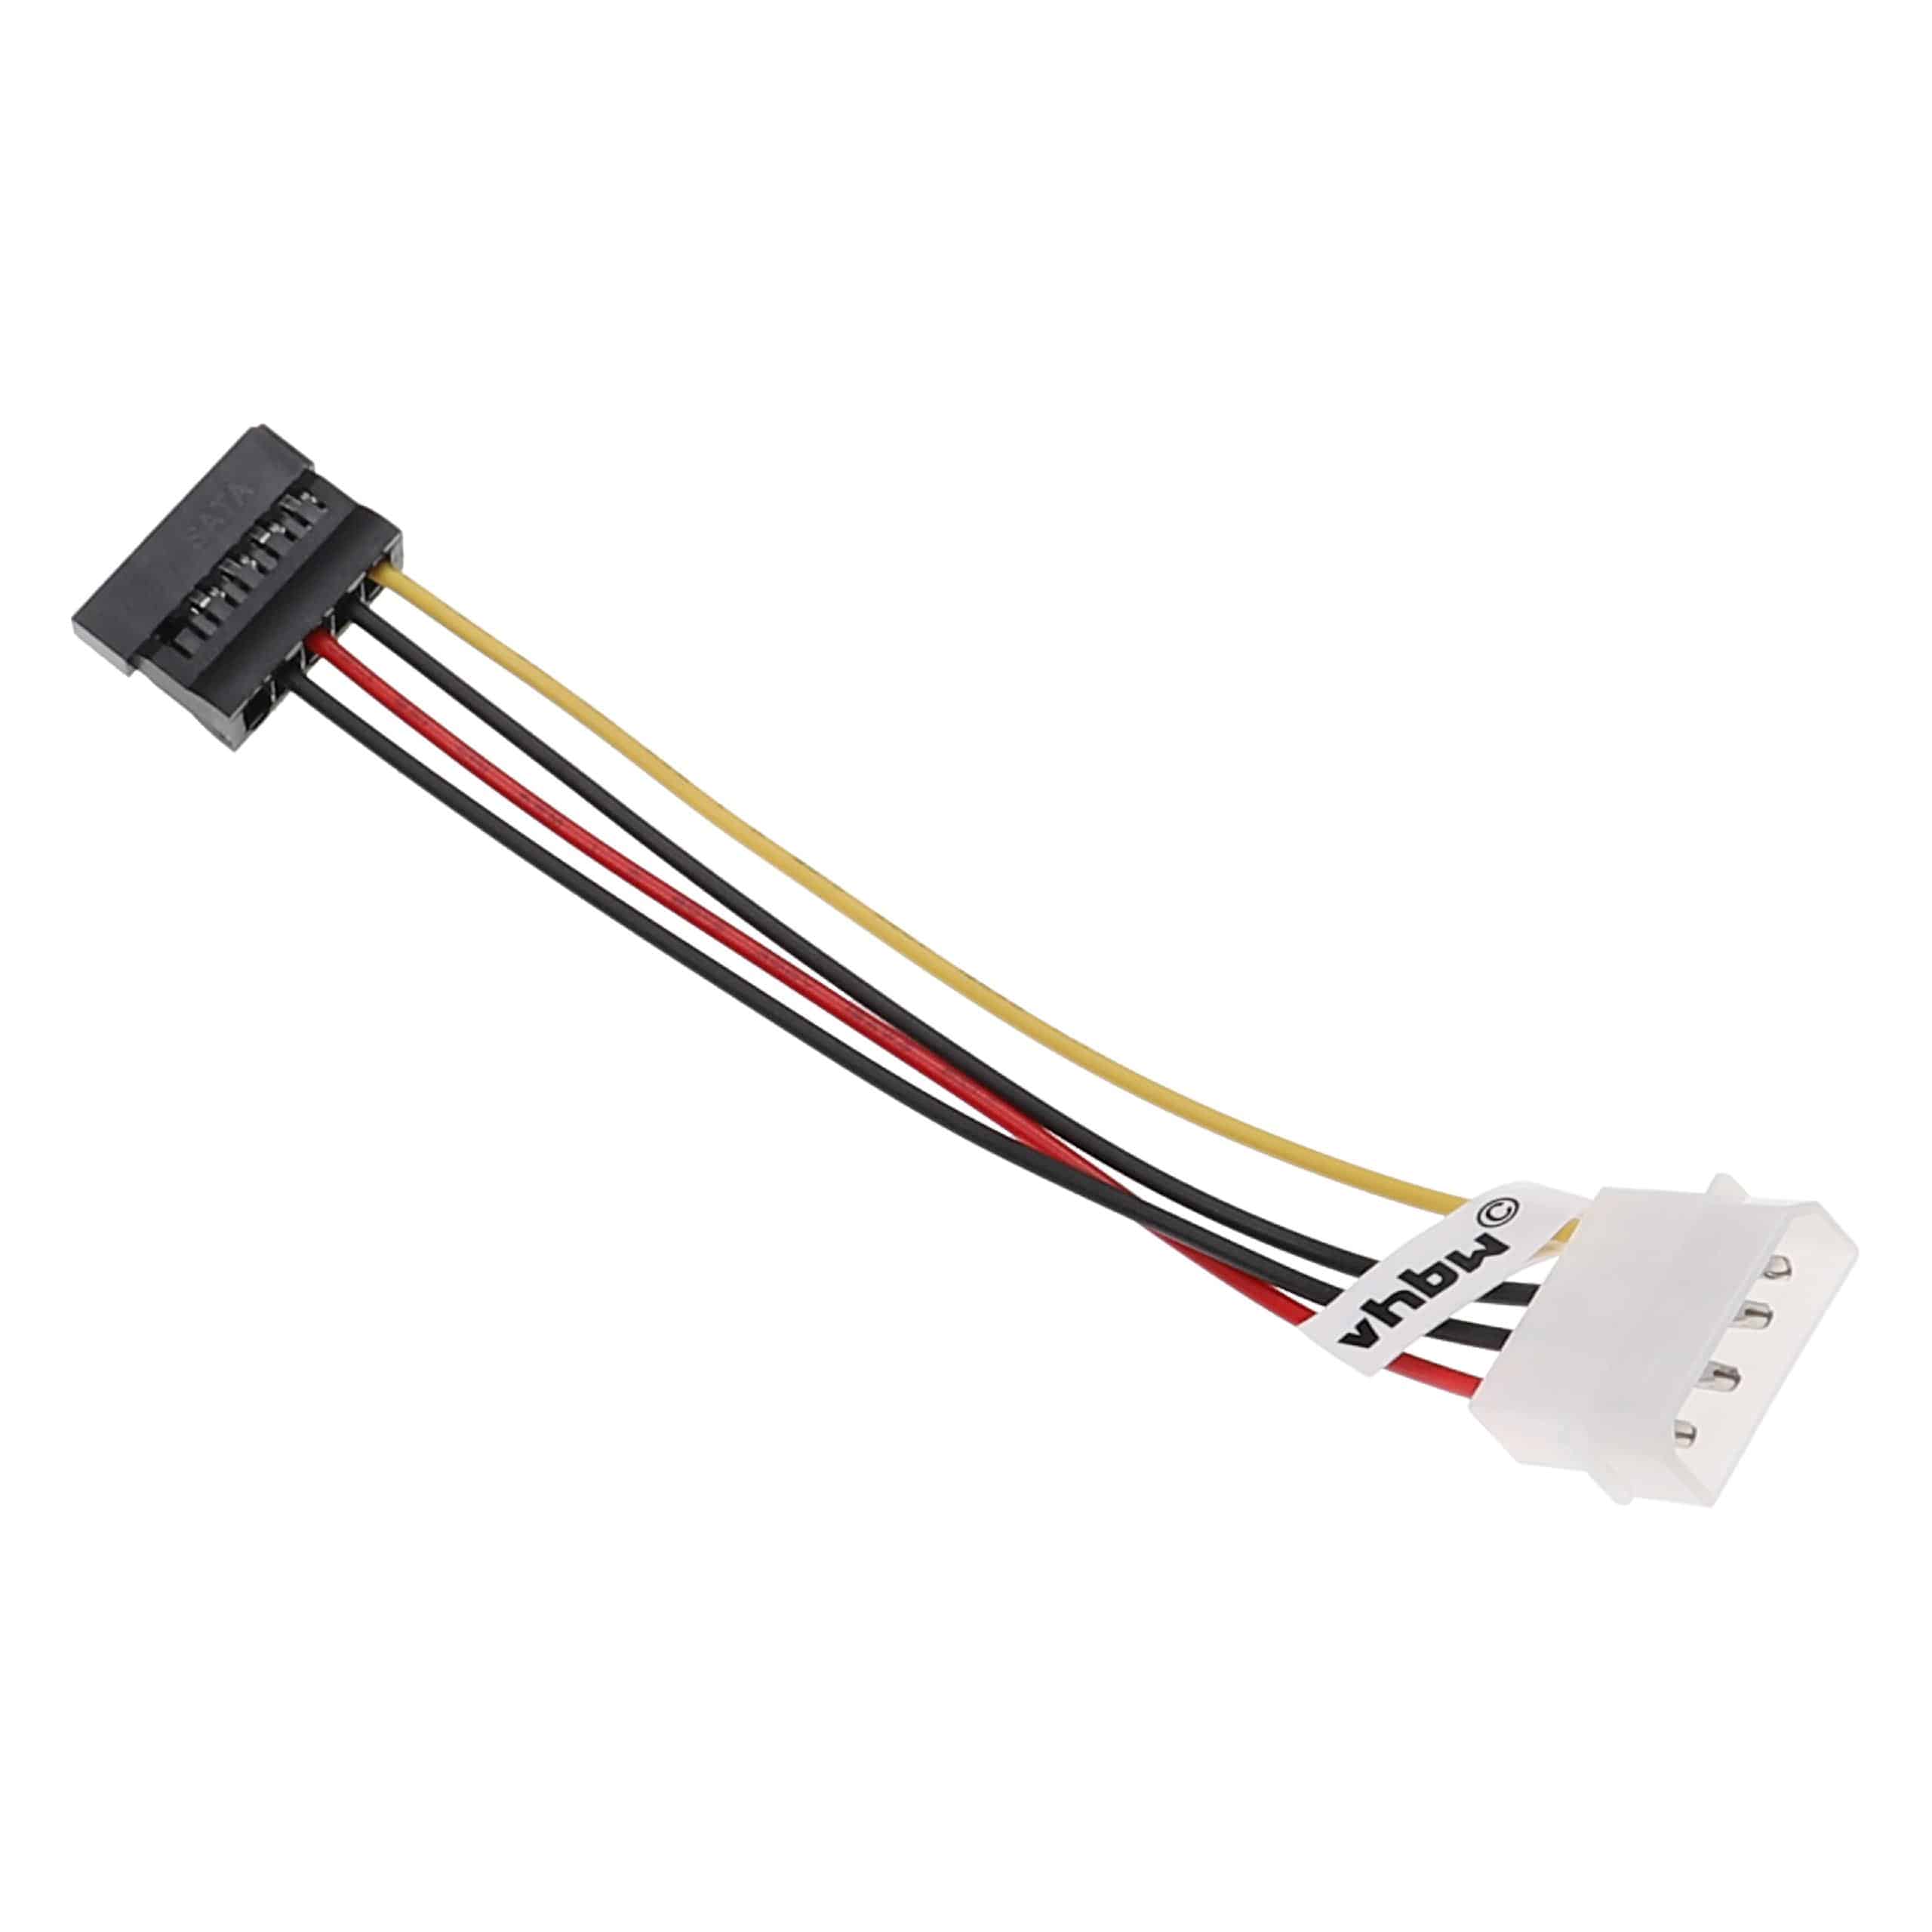 Power Cable to SATA socket suitable for Hard Drives - IDE Power Cable, 15 cm